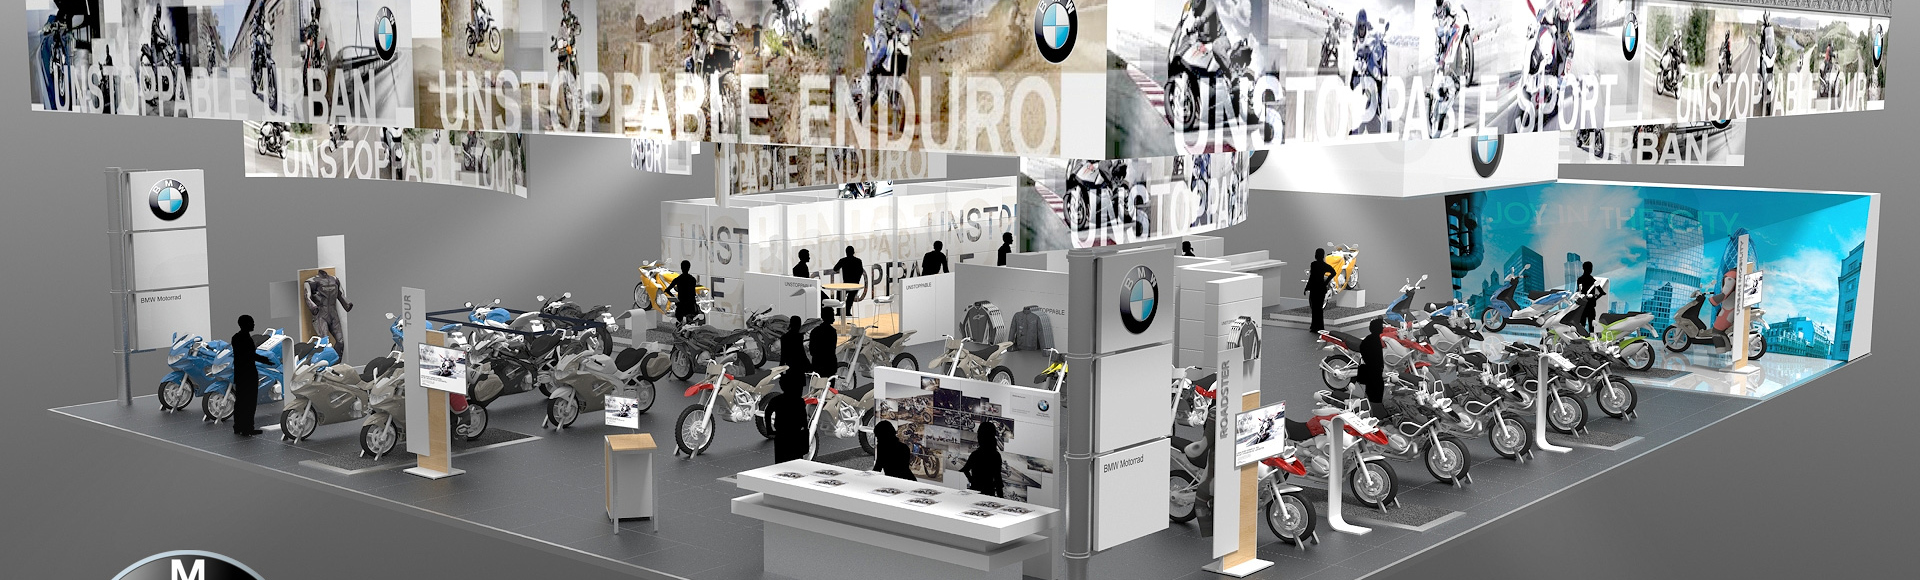 Stand d'exposition BMW